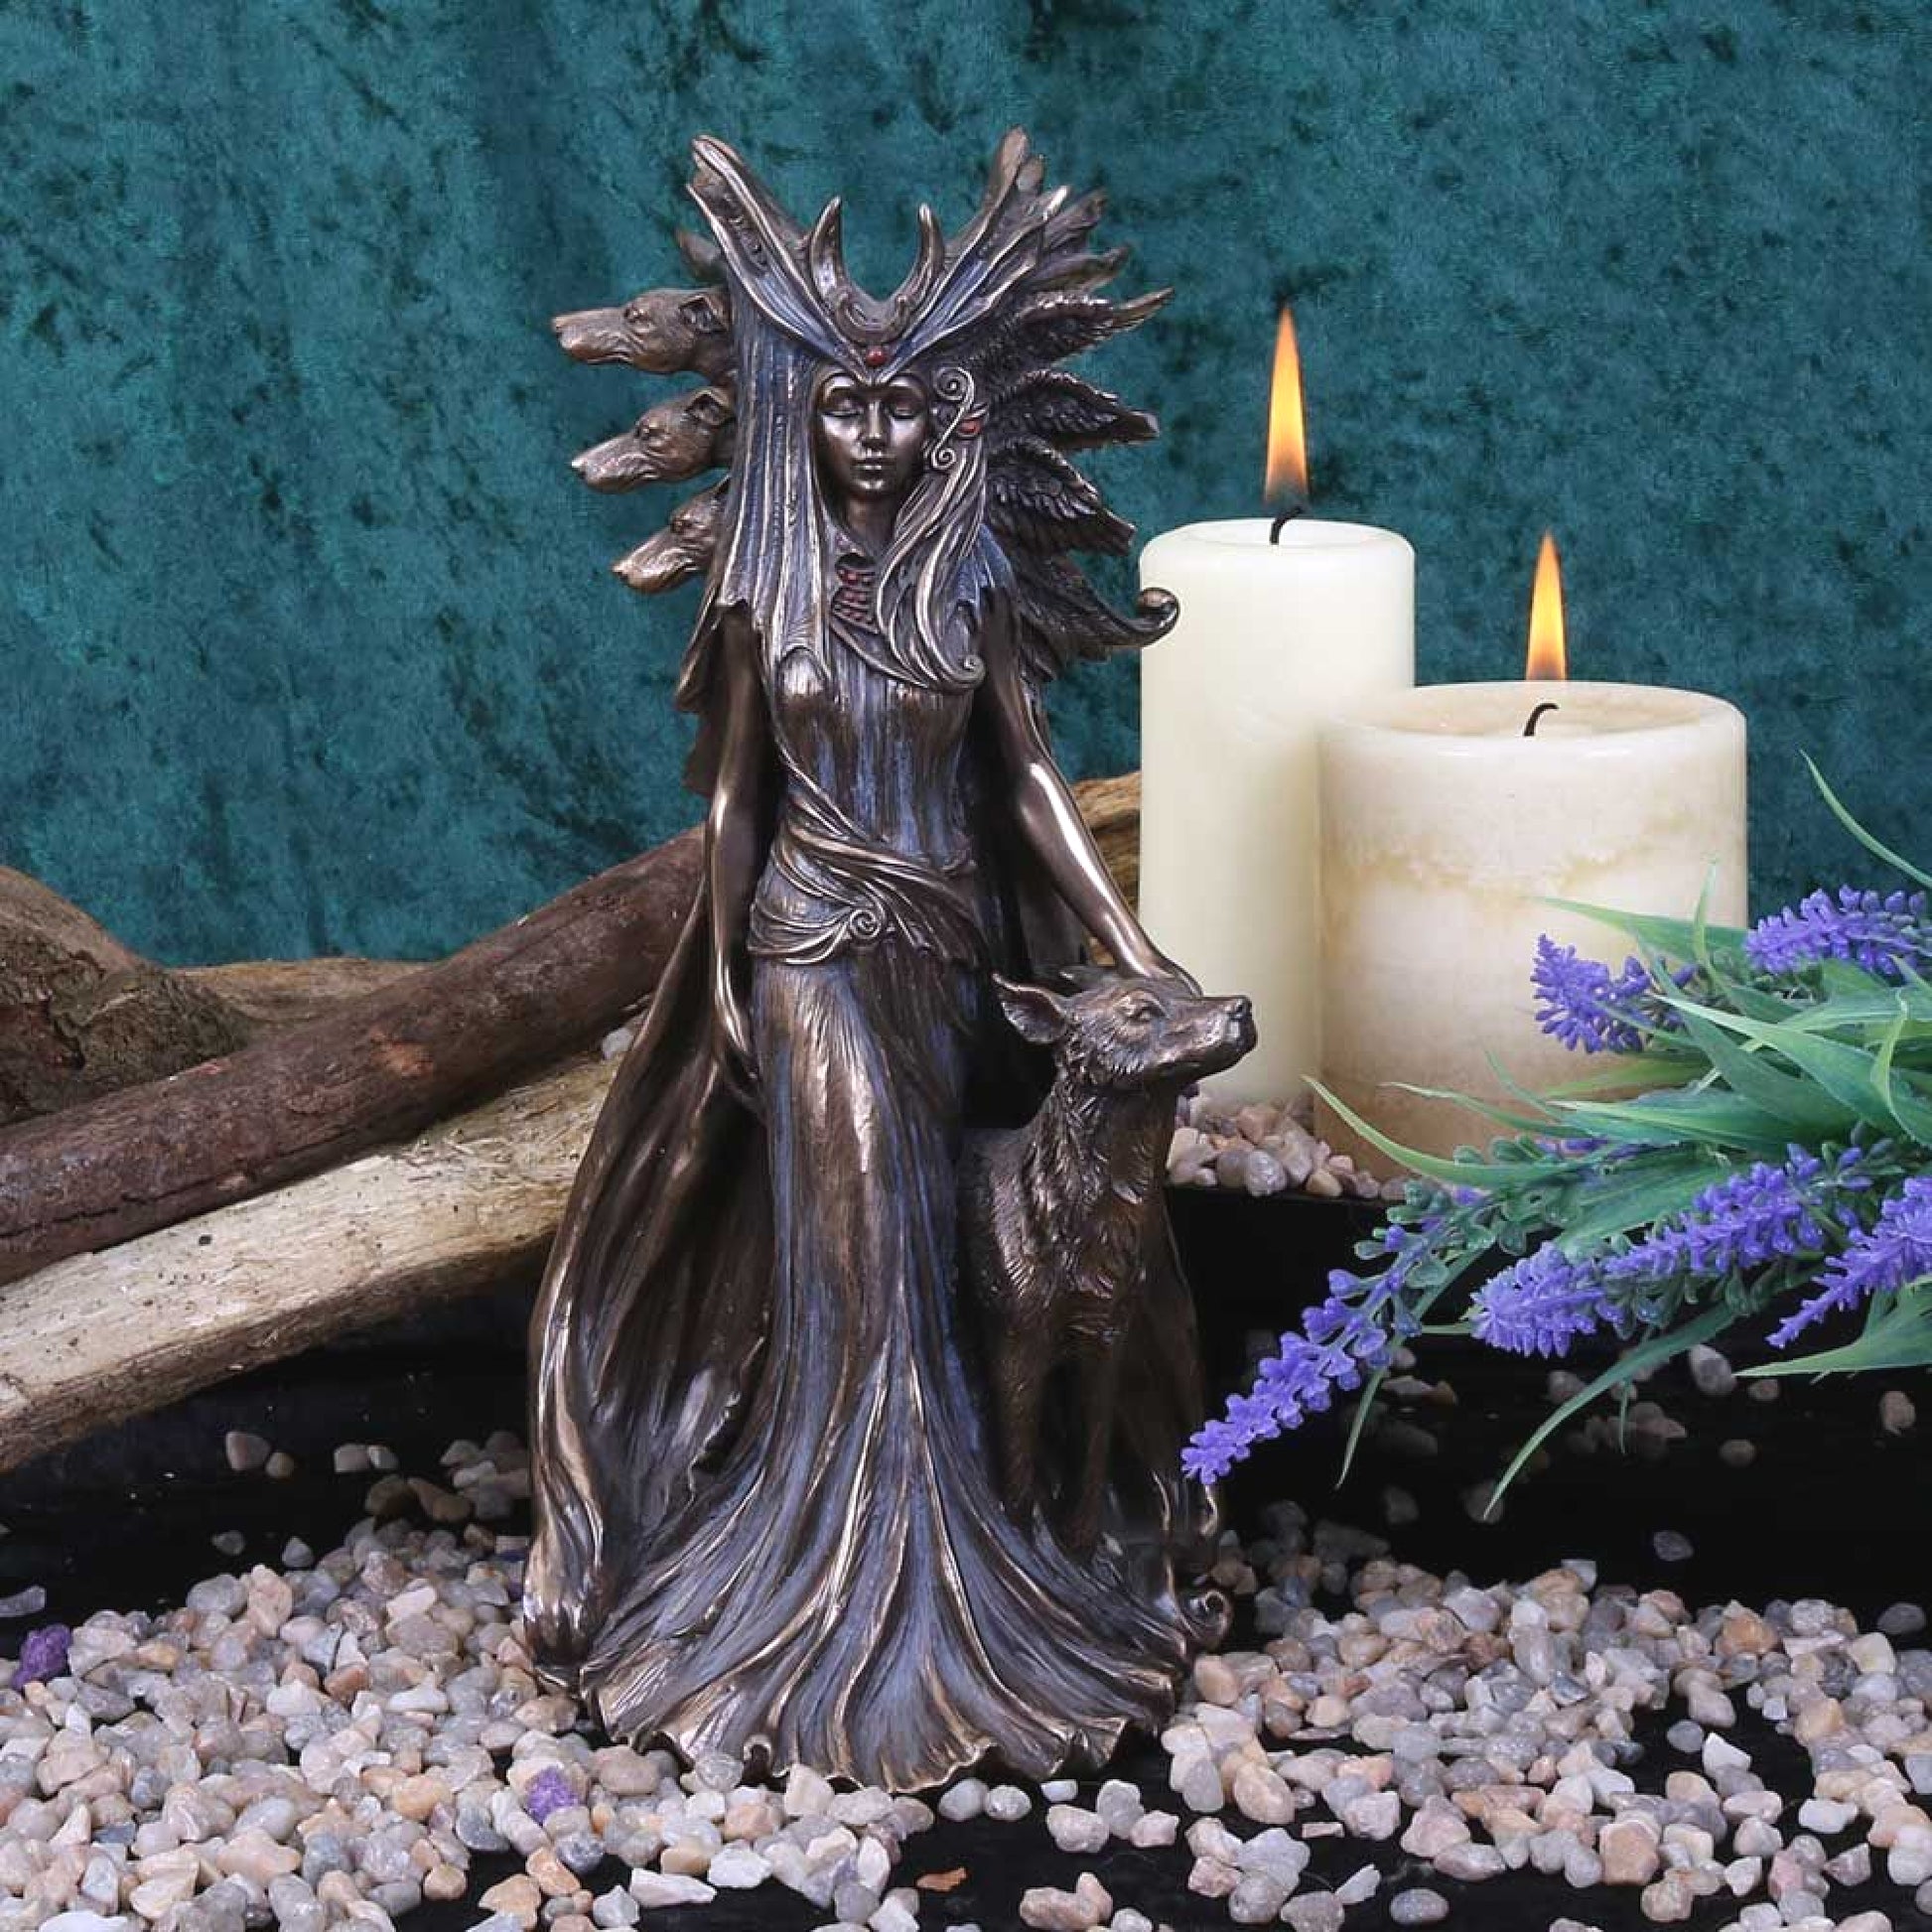 Marc Potts, the sculptor has imagined the essence of Hekate (or Hecate) beautifully with a long flowing dress and full length cape flowing behind her, a magnificent headdress, along with four faithful hounds. Figurine is 25cm tall